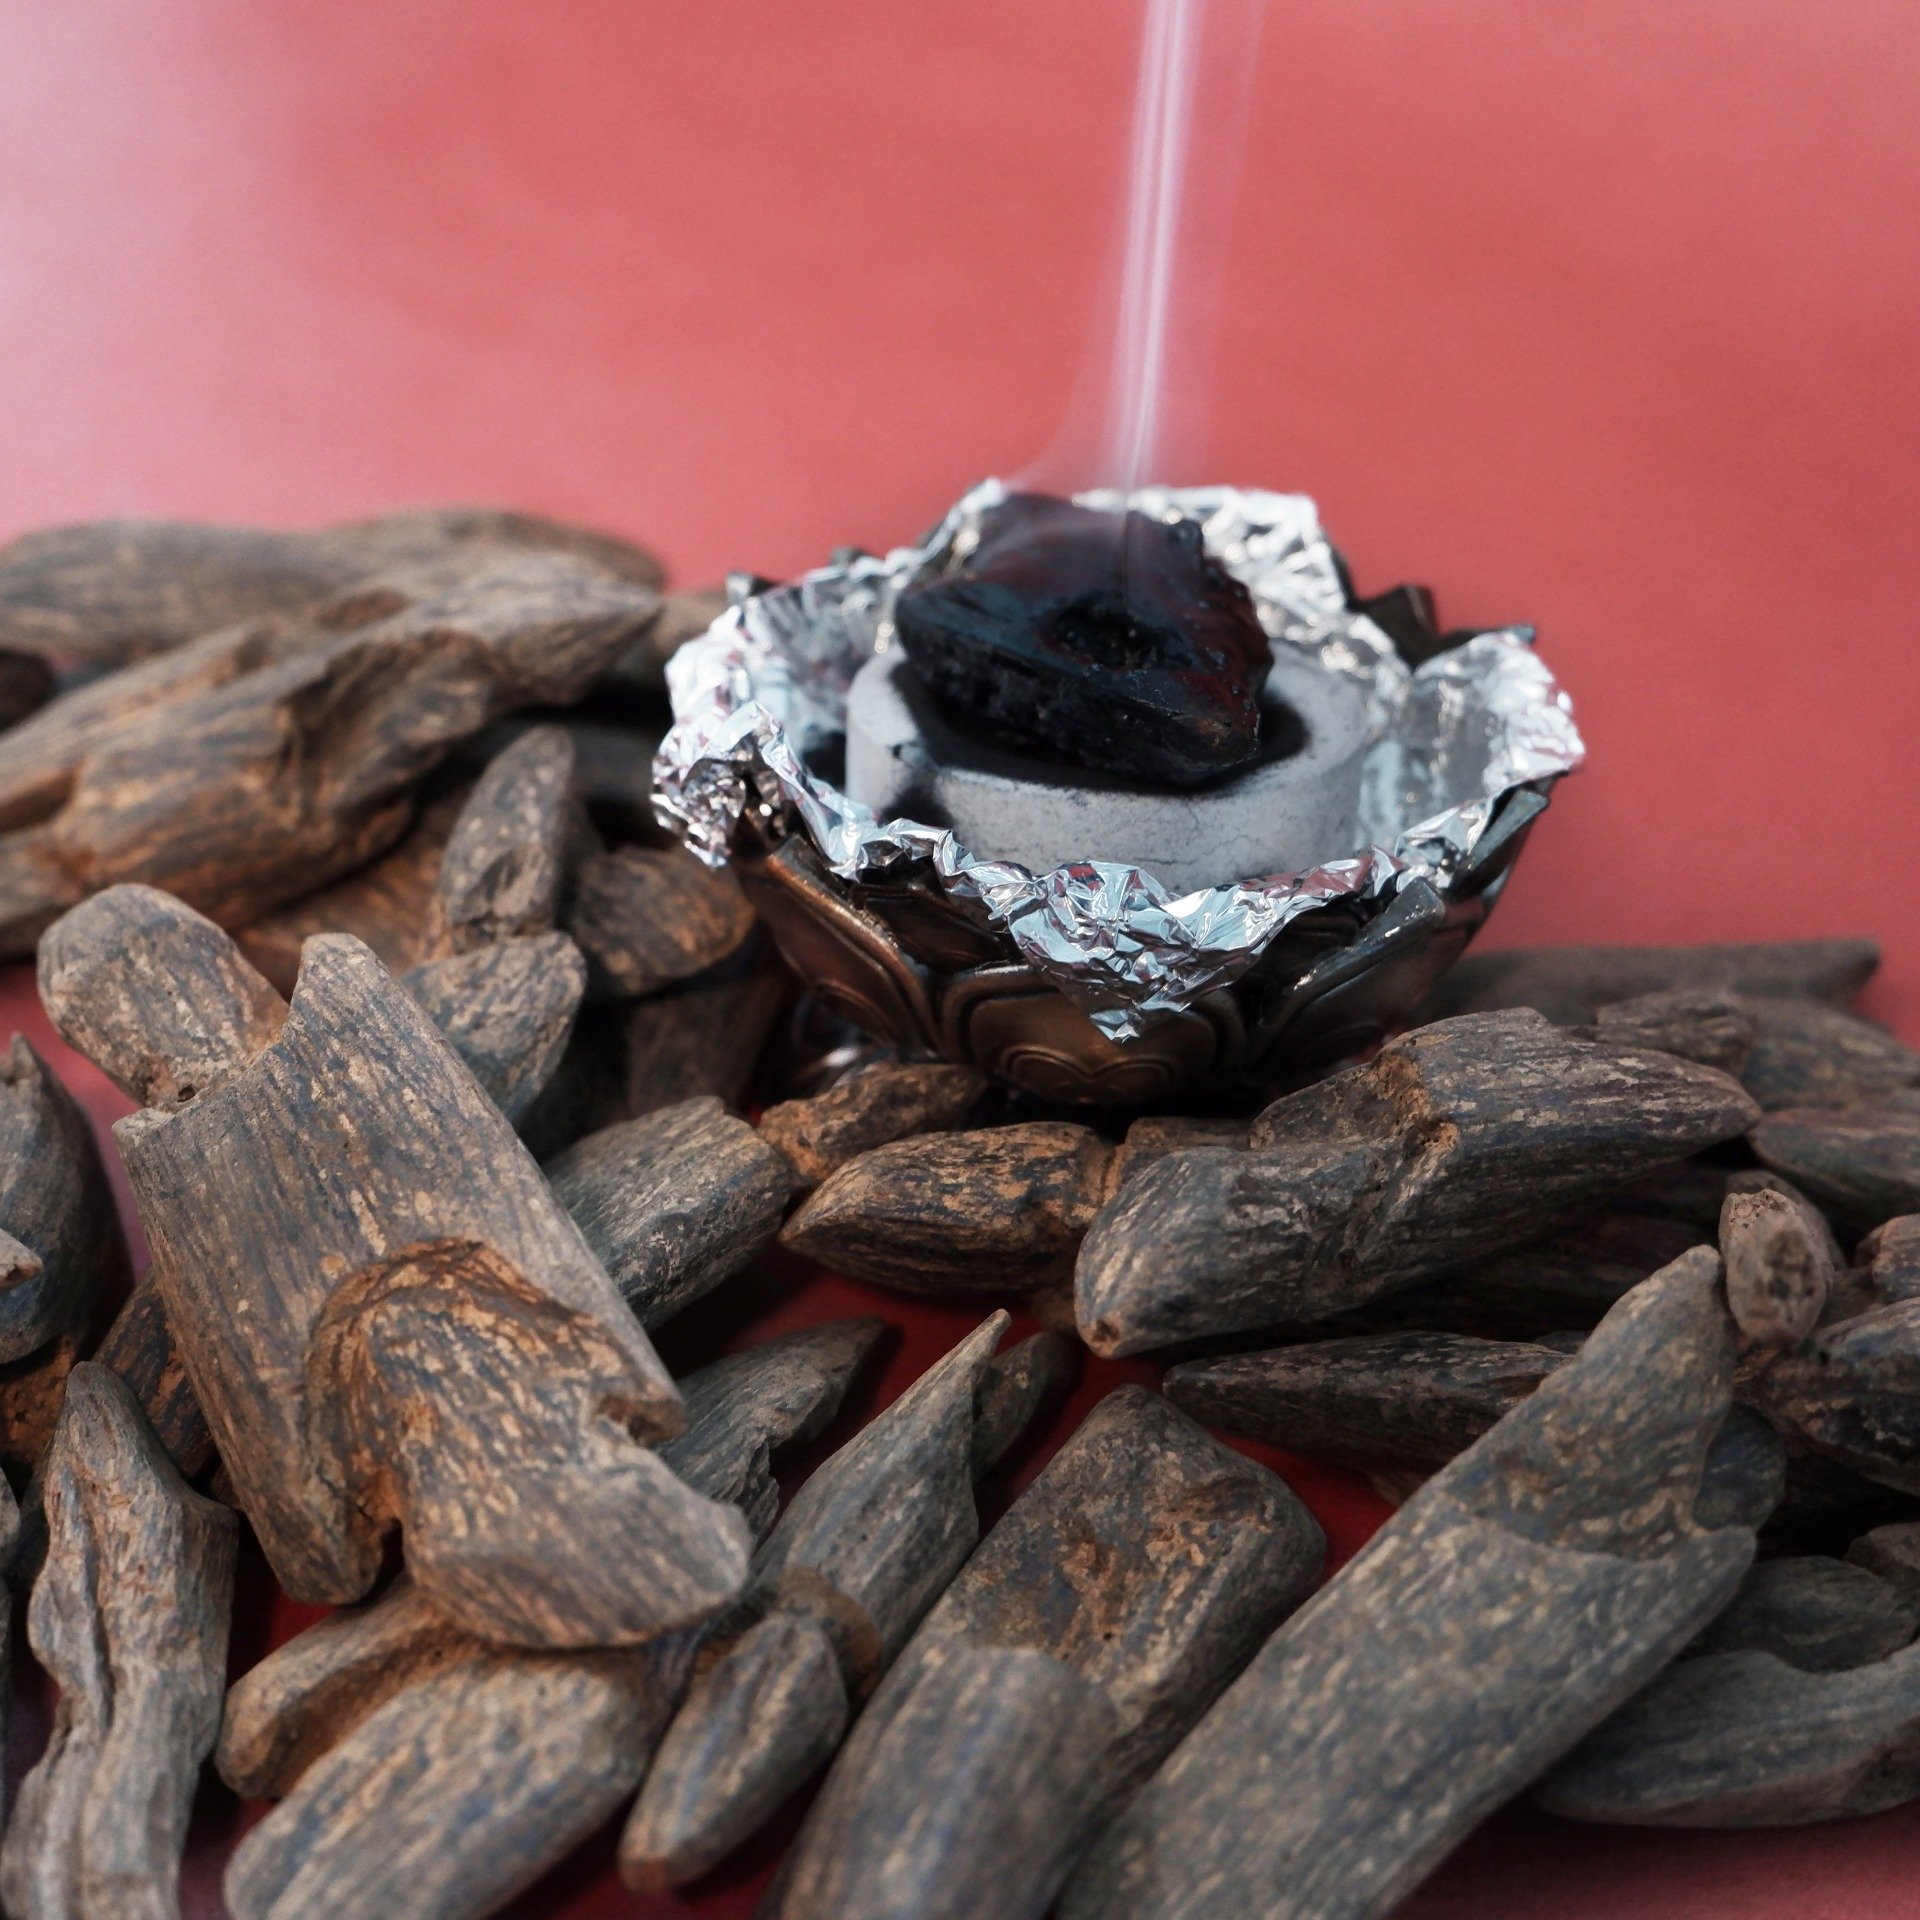 Agarwood, also called aloeswood incense chips